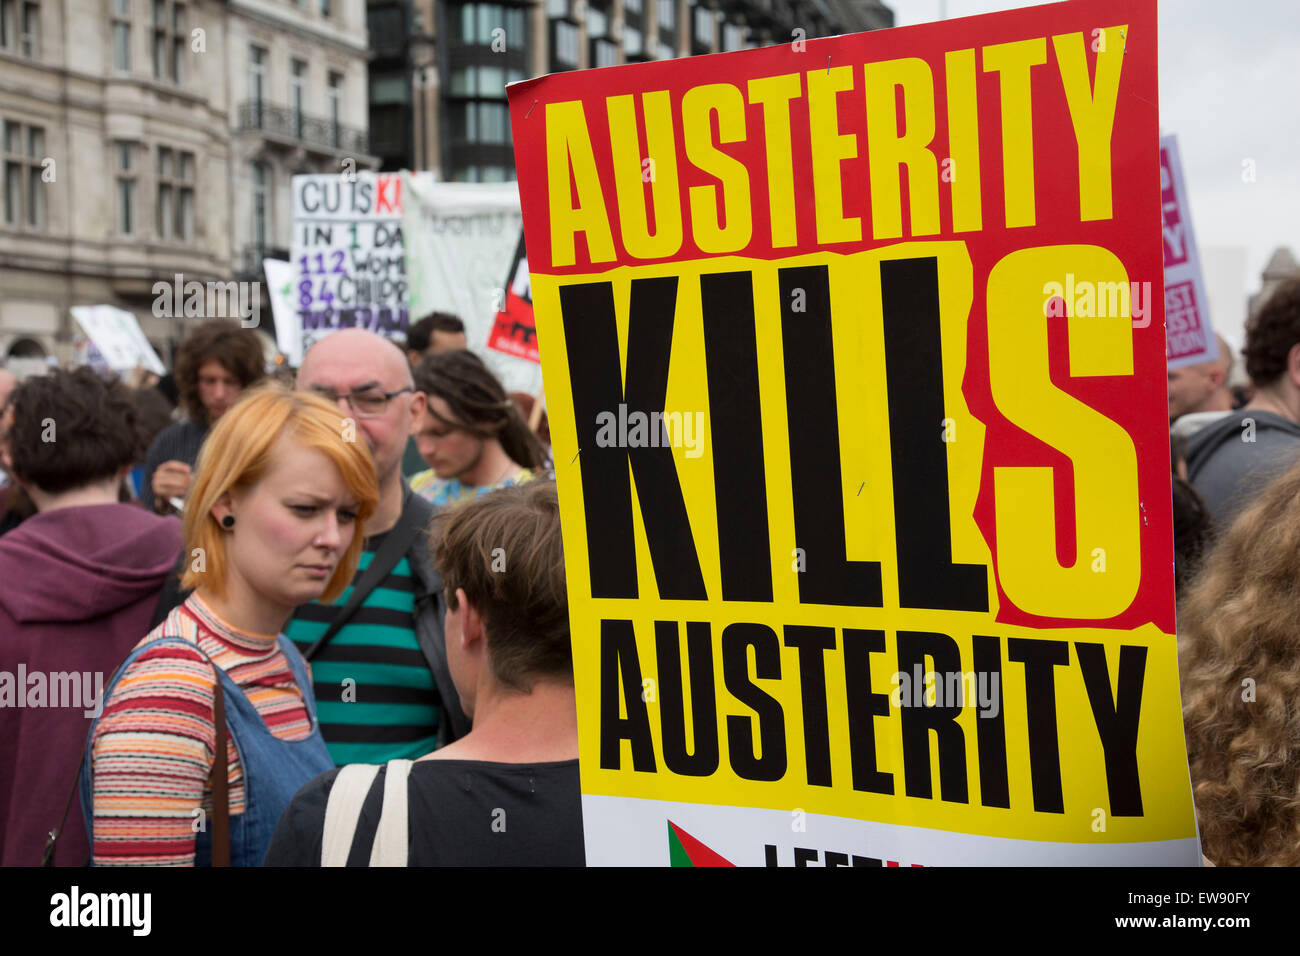 London, UK. Saturday 20th June 2015. People's Assembly against austerity demonstration through Central London. 250,000 people gathered to protest in a march through the capital protesting against the Tory cuts, holding placards and banners. People gathering in Parliamnet Sq for the rally. Credit:  Michael Kemp/Alamy Live News Stock Photo